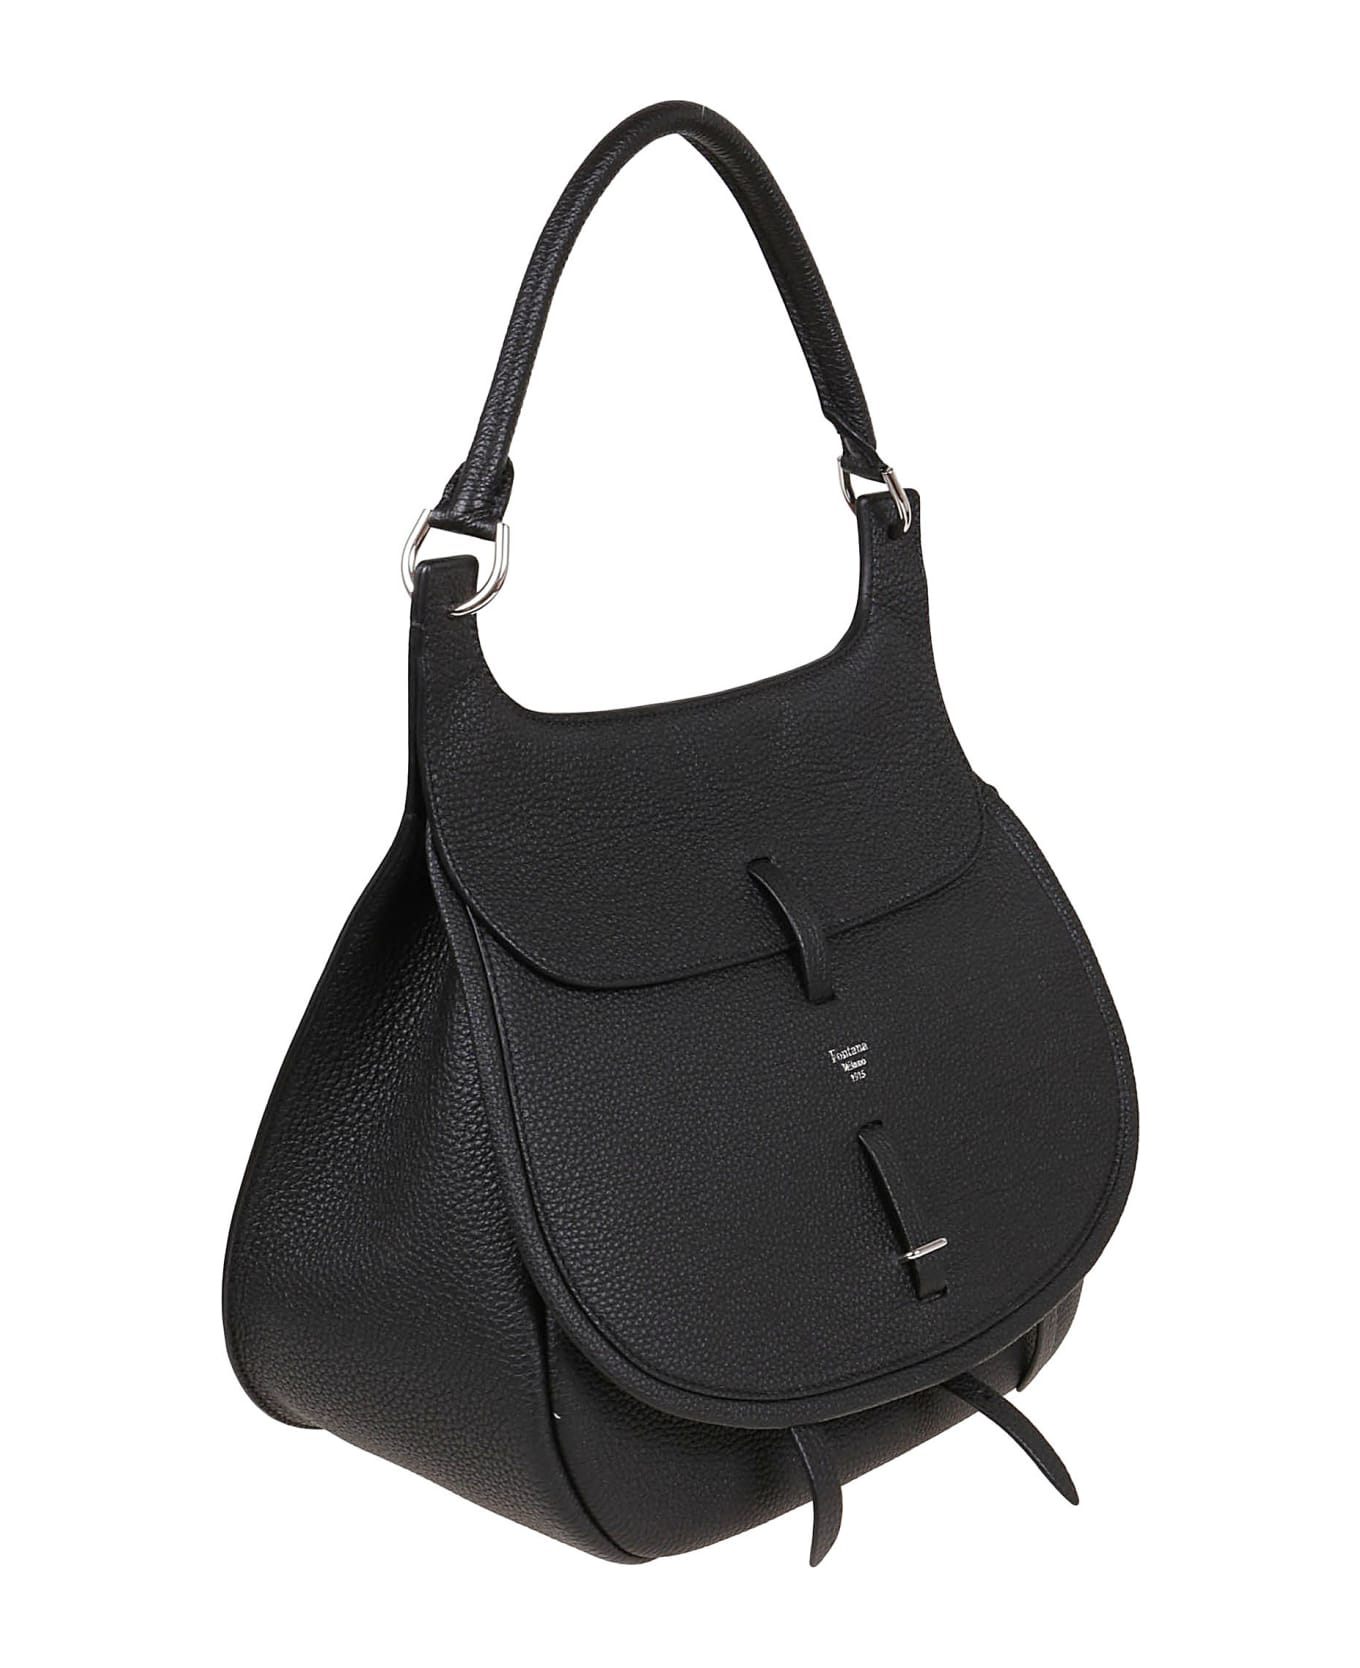 Fontana Couture Leather Bag - Carbon